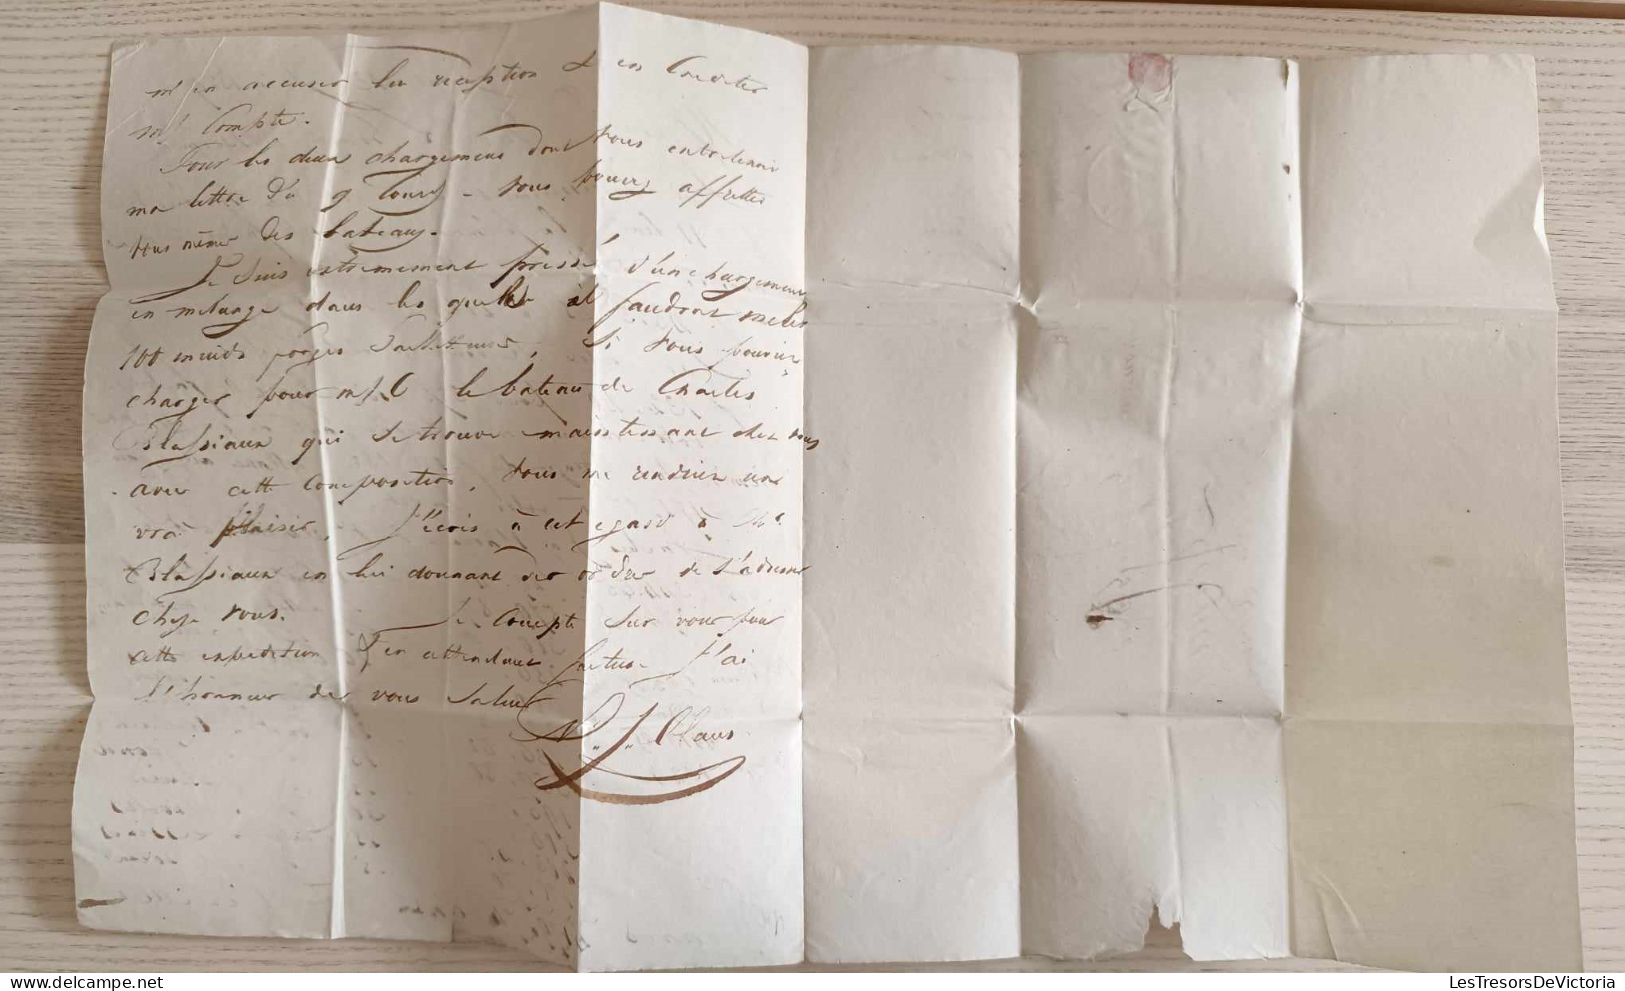 Letter Mailed On October 13th 1829 From Gent To Hornu  - Weight Indication "24" Wigtjes - 1815-1830 (Hollandse Tijd)